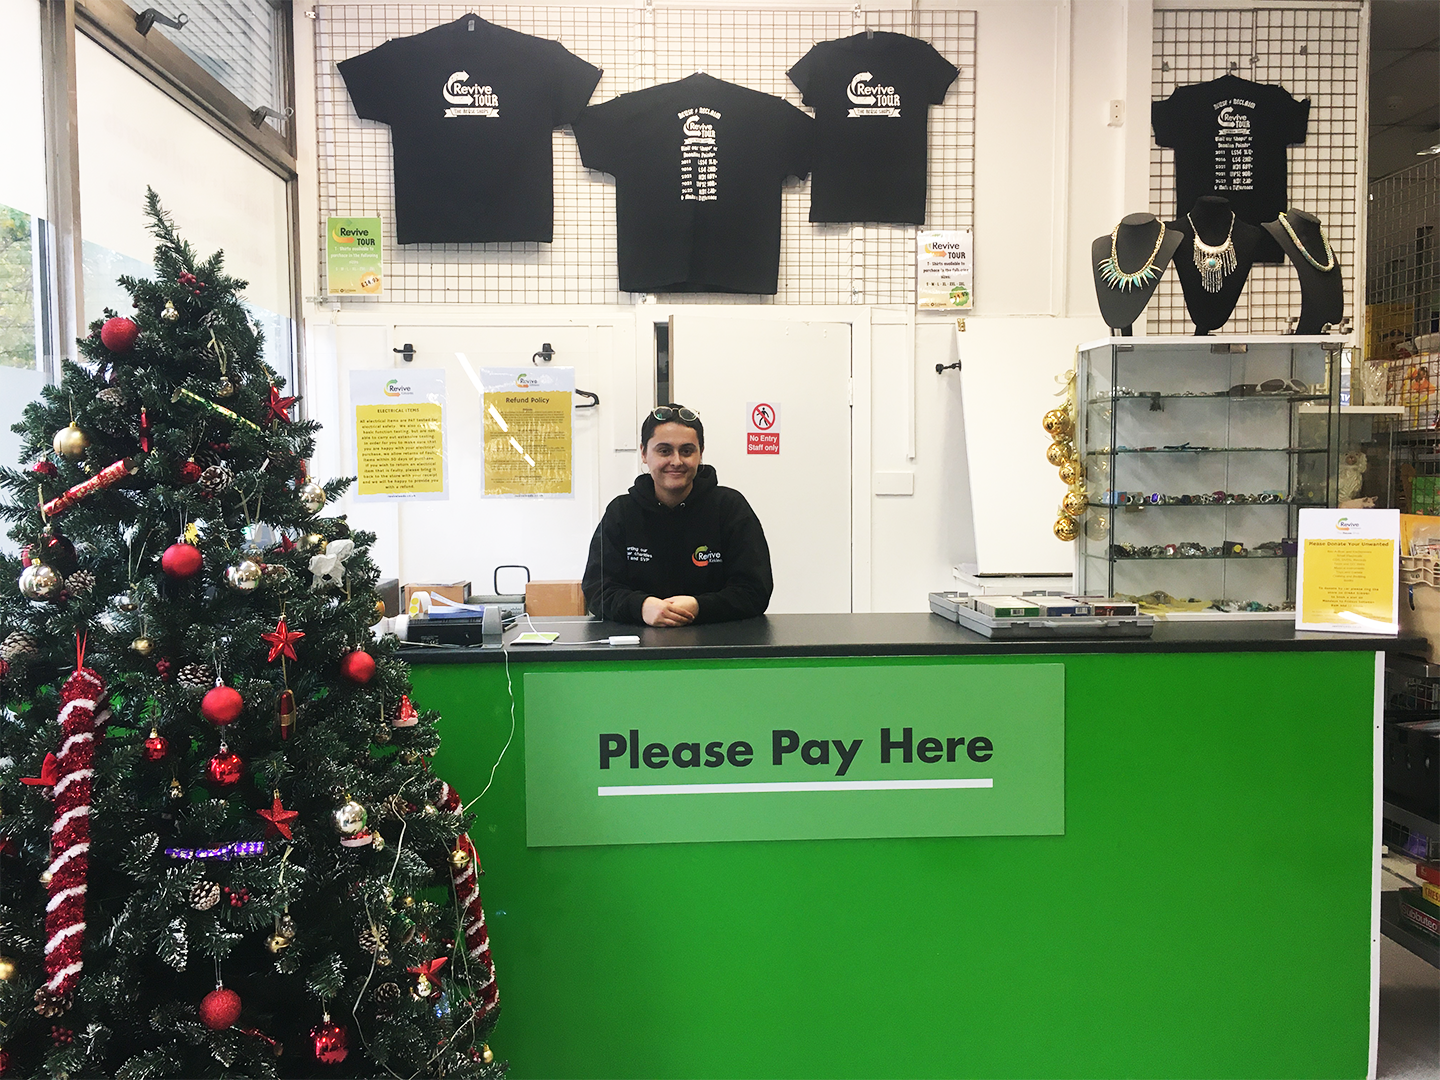 A Revive Reuse staff member working on the till behind the shop counter. The counter has a sign displayed that reads "Please Pay Here".